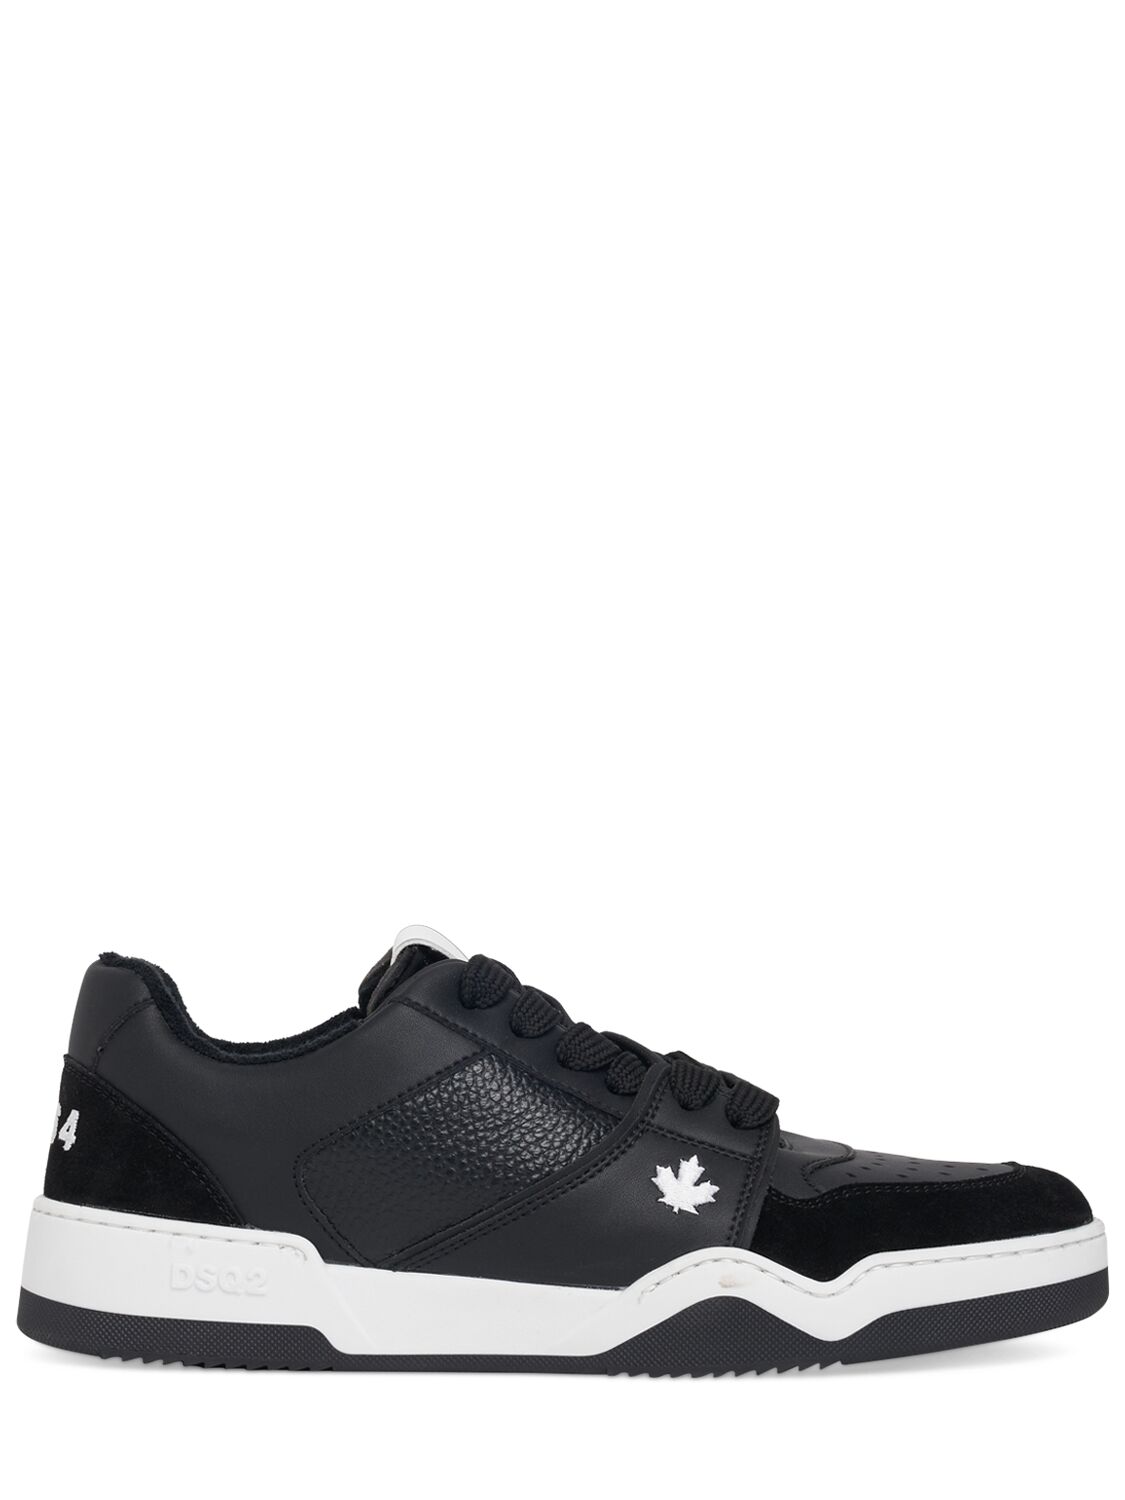 Dsquared2 Logo Leather Sneakers In Black